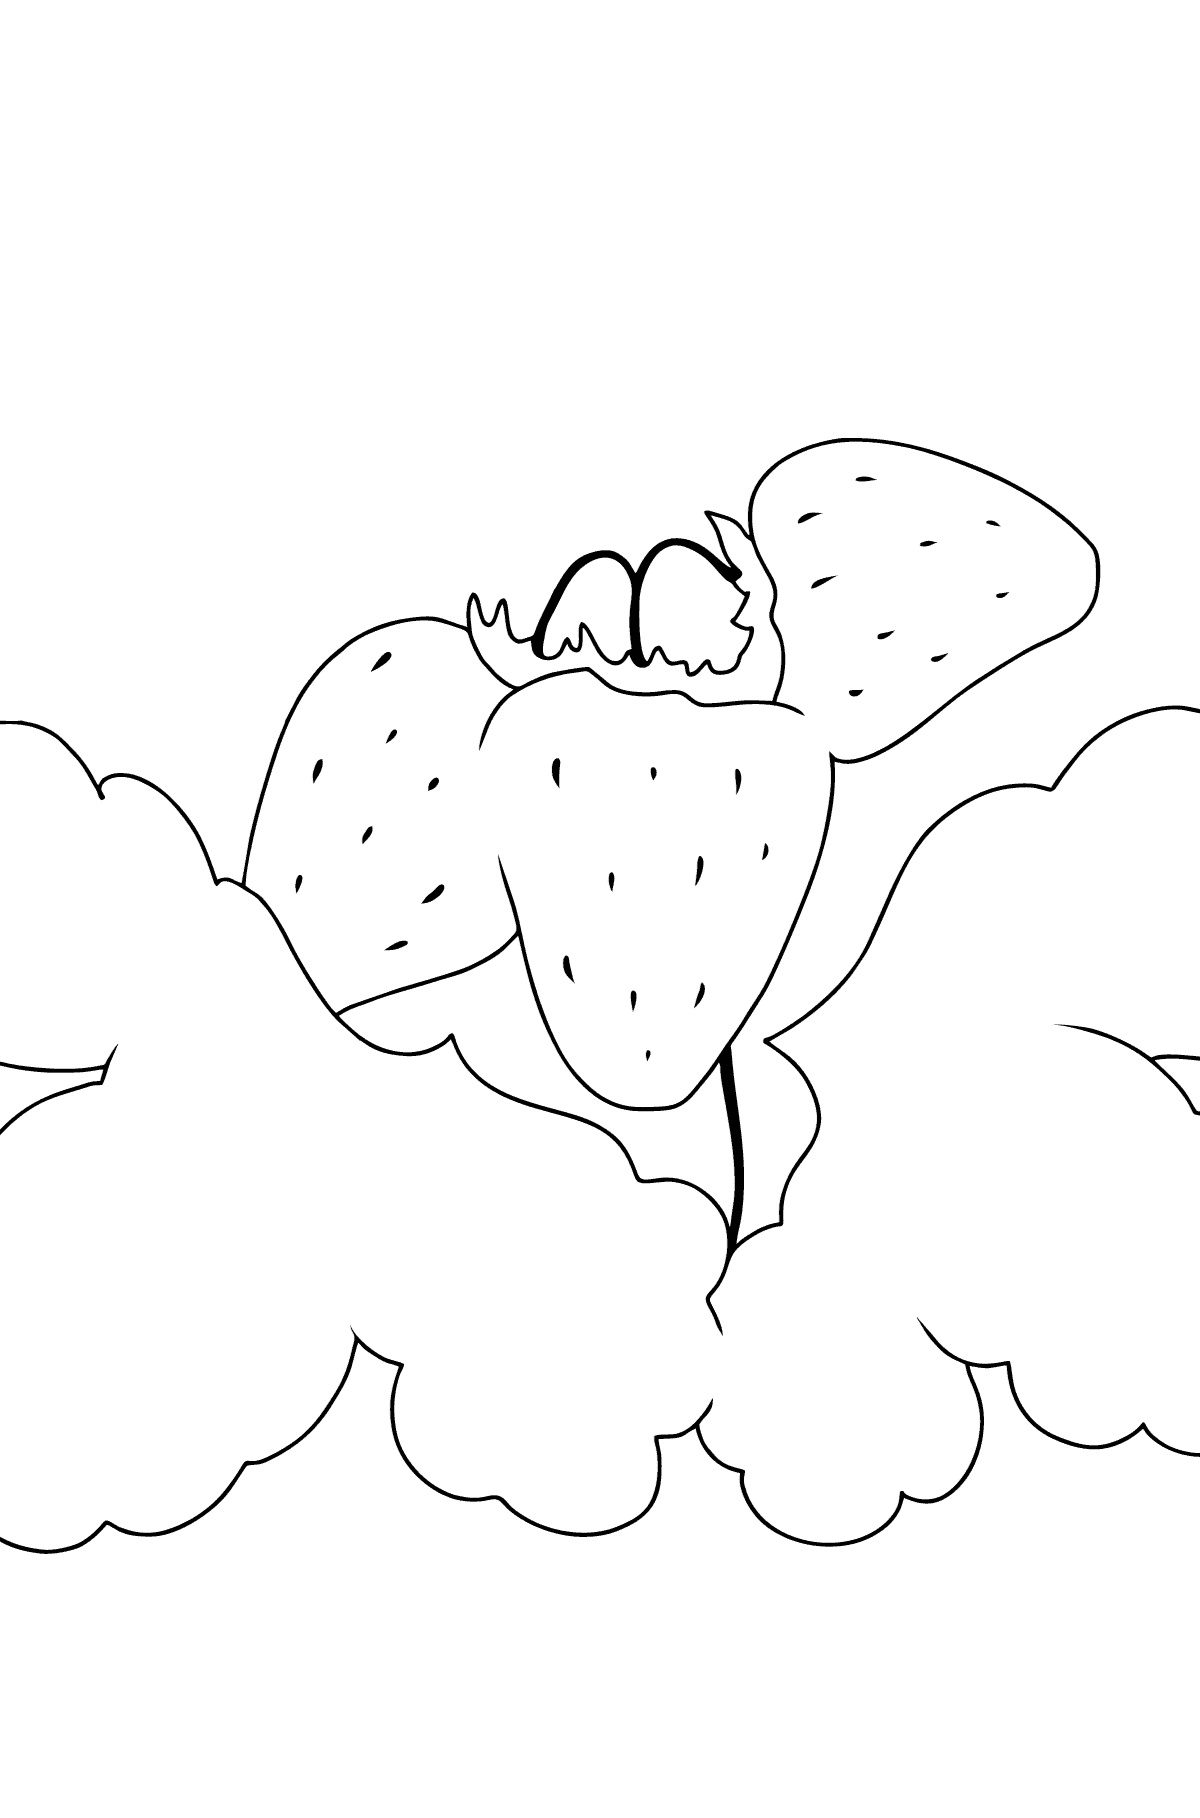 Strawberry coloring page for toddlers - Coloring Pages for Kids